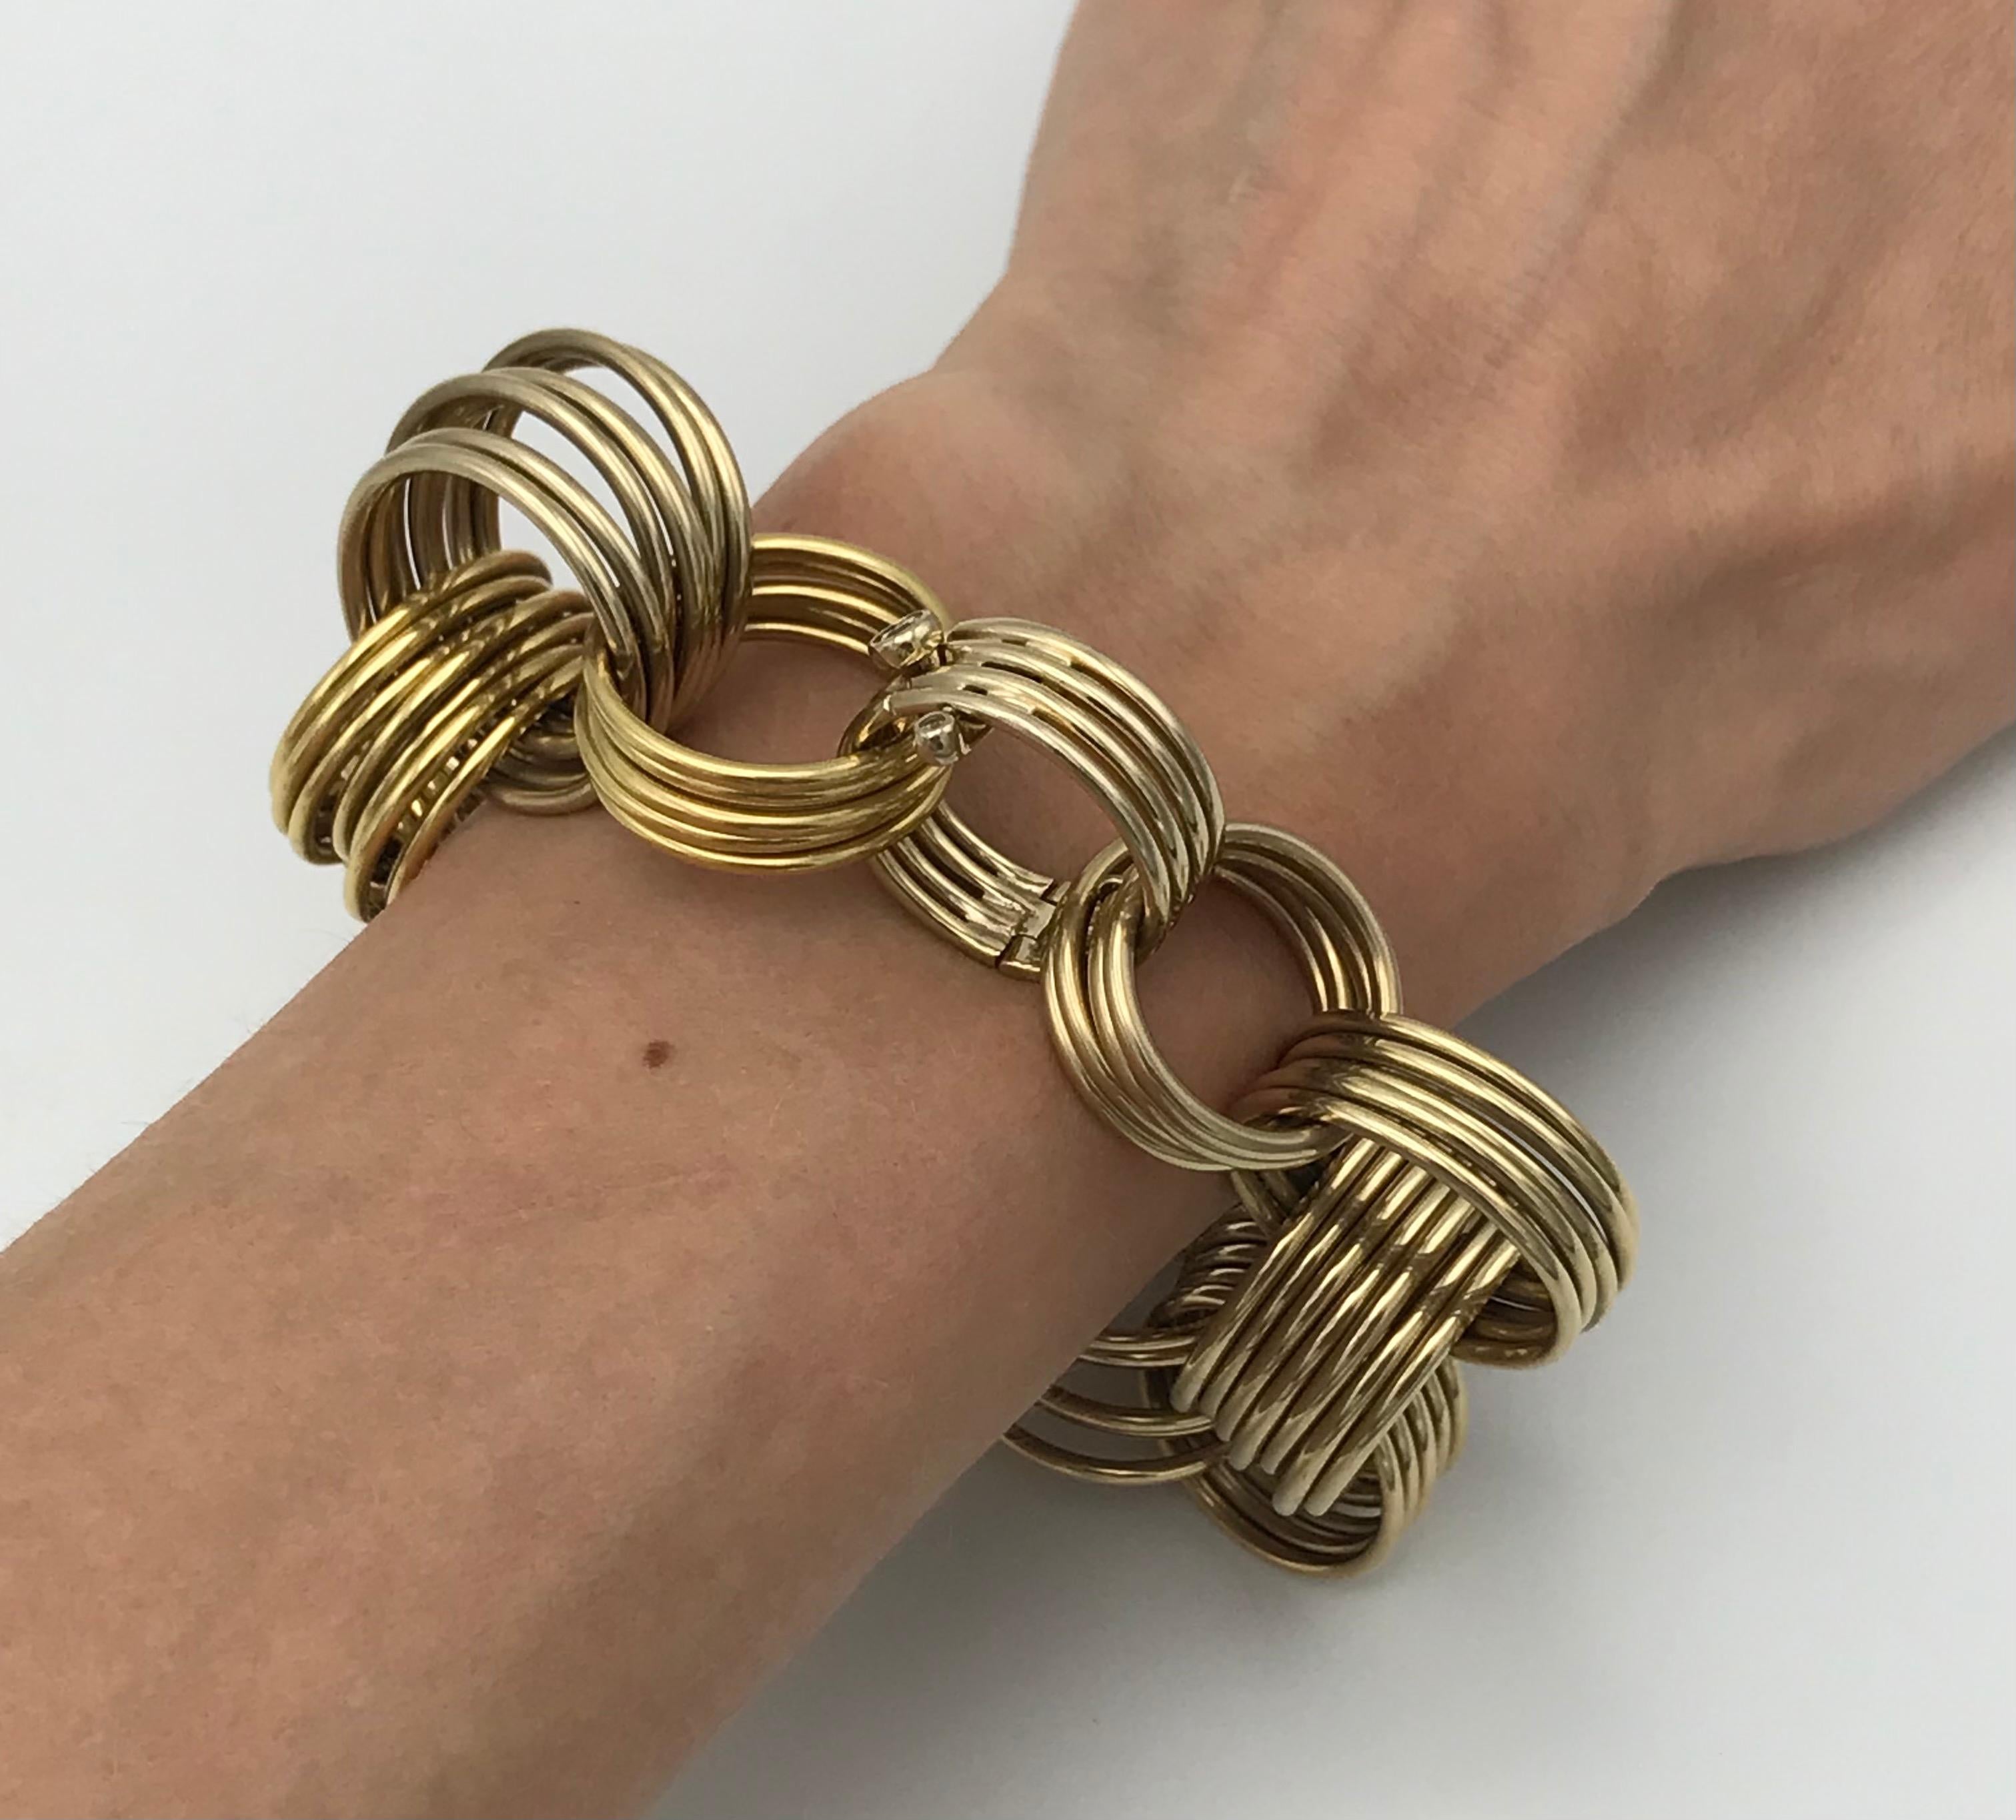 H. Stern Wire Rings 18k Yellow Gold Bracelet In Excellent Condition For Sale In Beverly Hills, CA